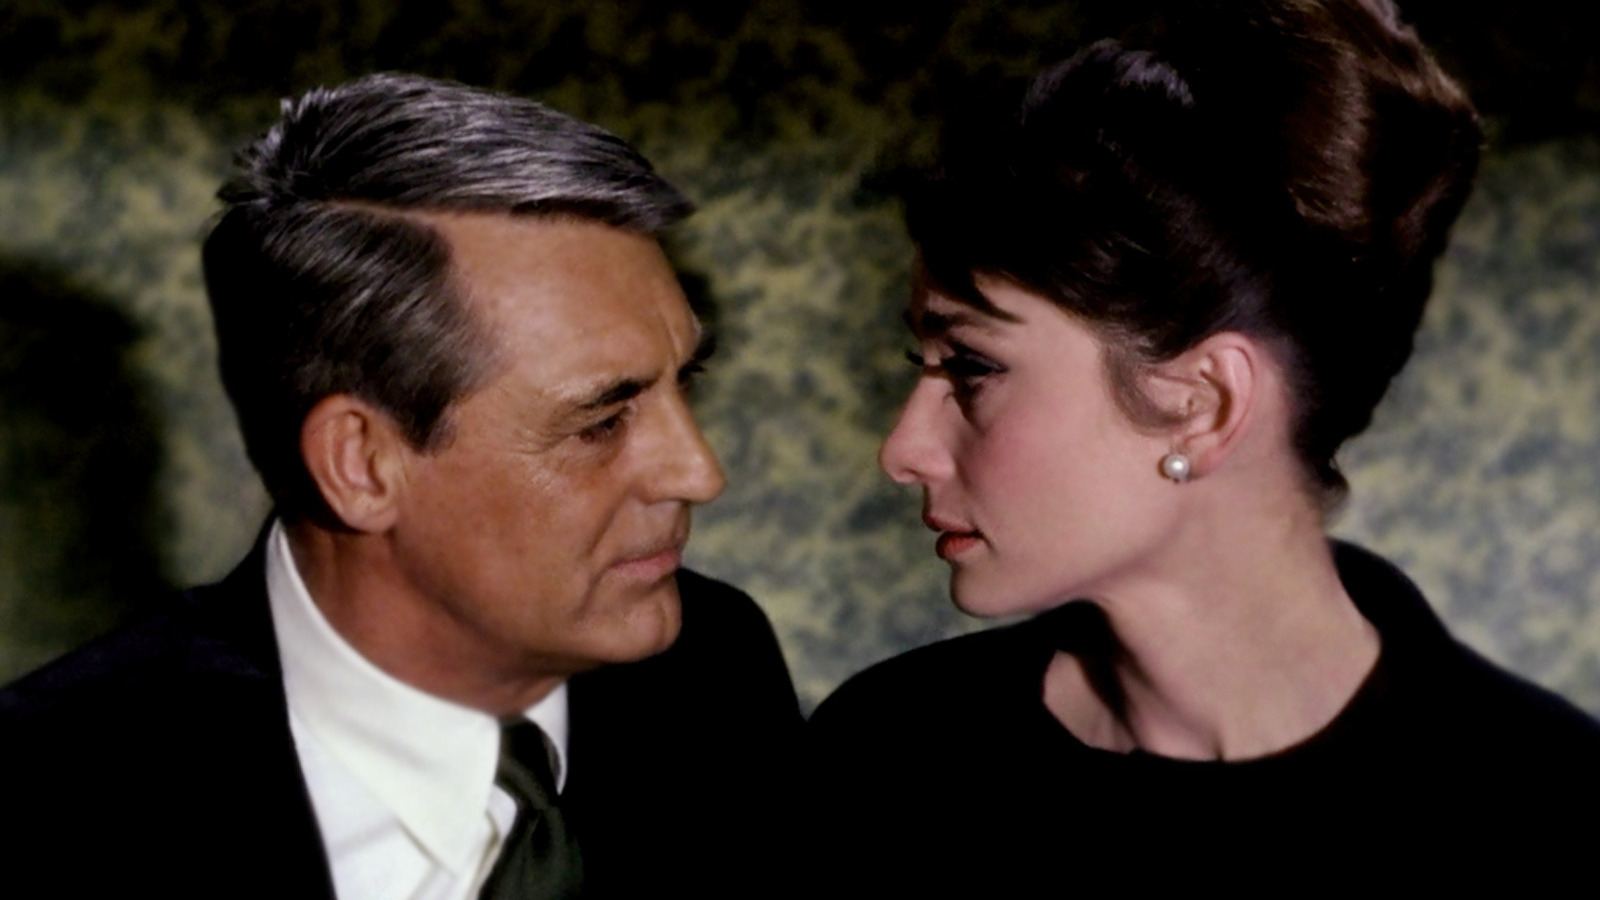 #Audrey Hepburn And Cary Grant Were Well Aware Of Their Awkward Age Gap In Charade